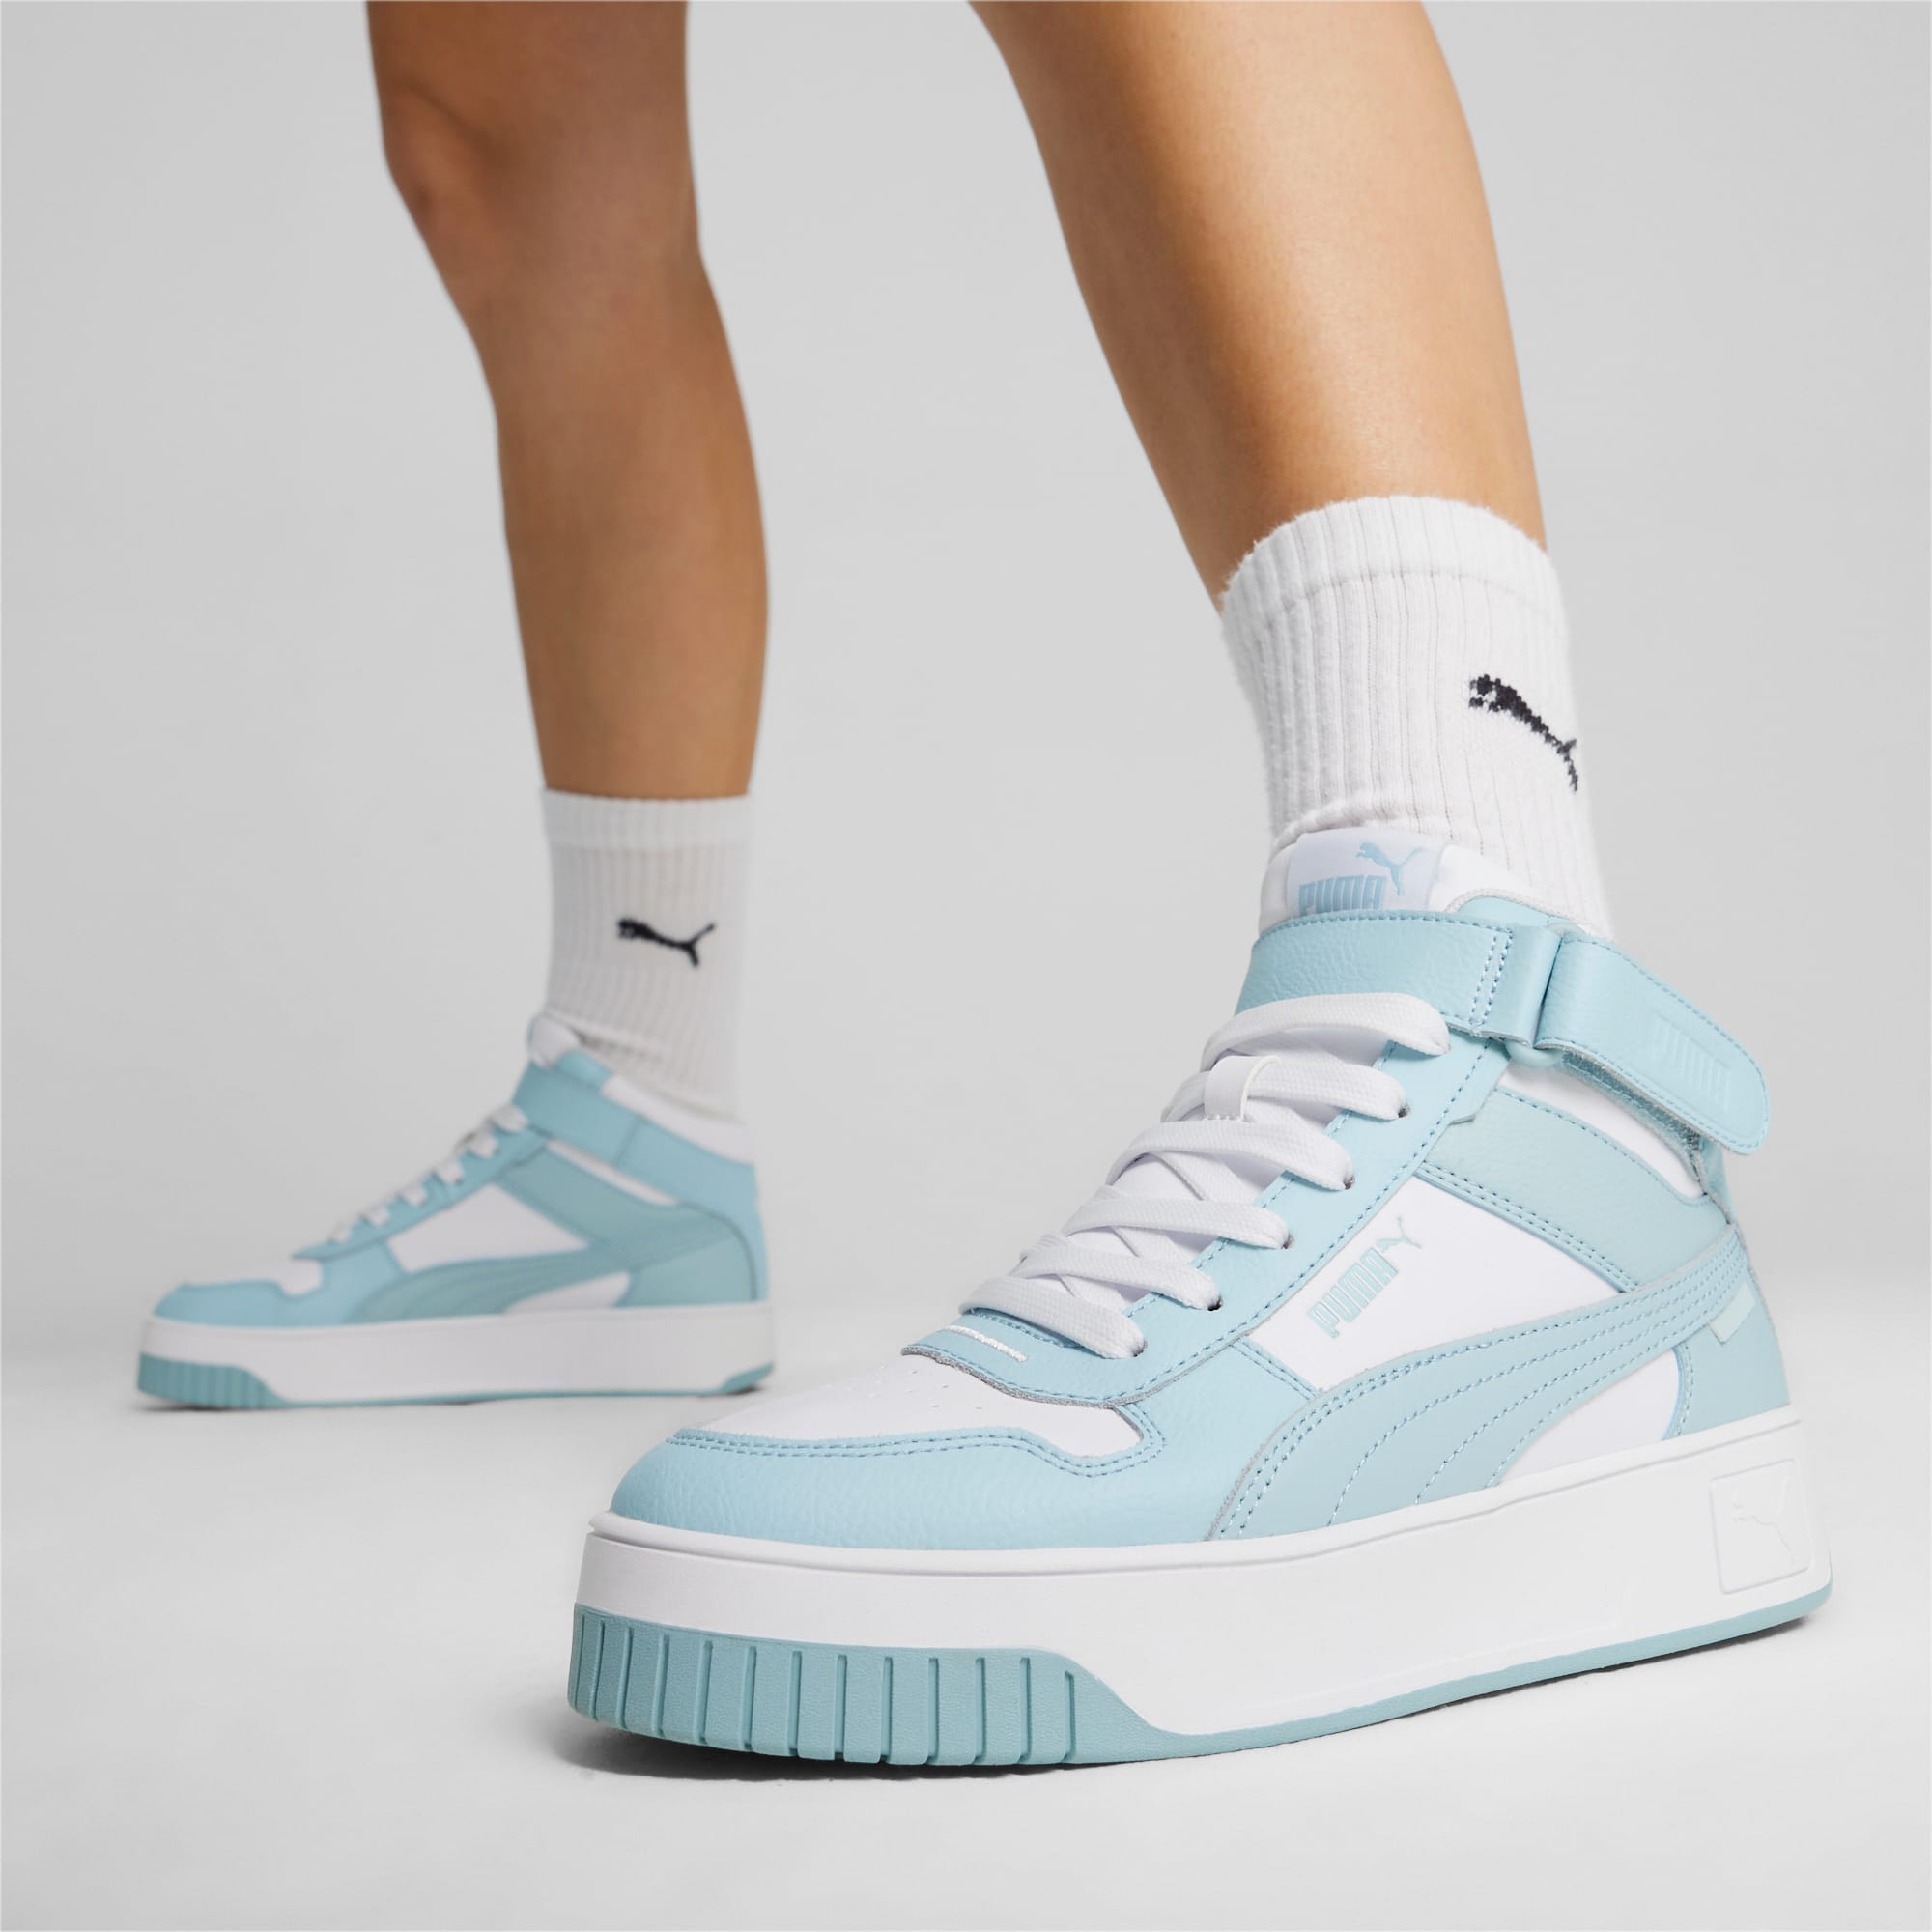 PUMA Carina Street Mid Women's Sneakers, White/Turquoise Surf, Size 40,5, Shoes